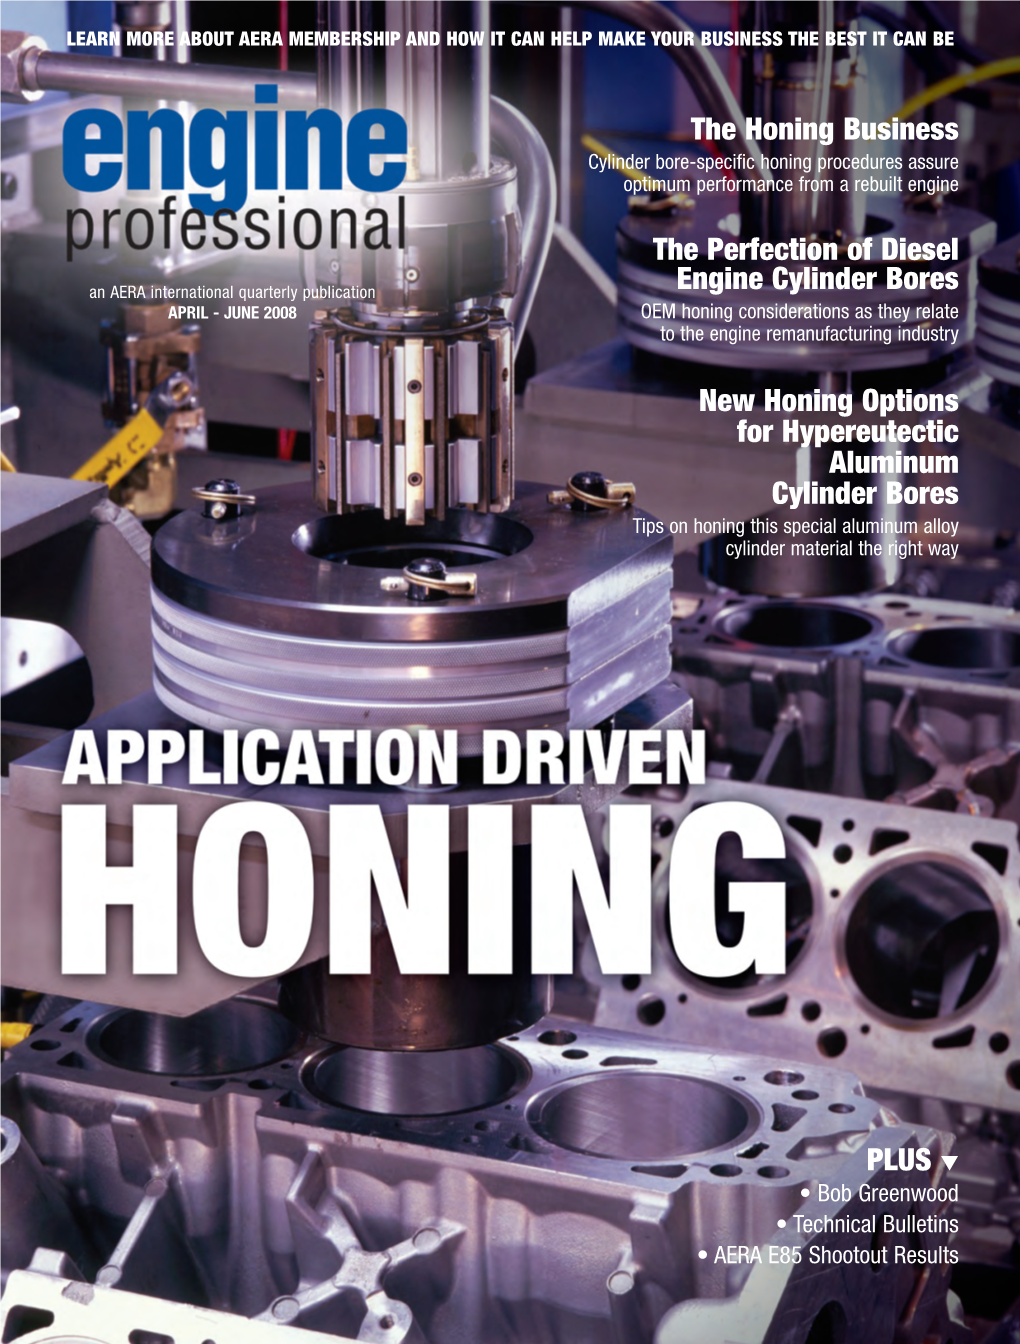 The Honing Business Cylinder Bore-Specific Honing Procedures Assure Optimum Performance from a Rebuilt Engine